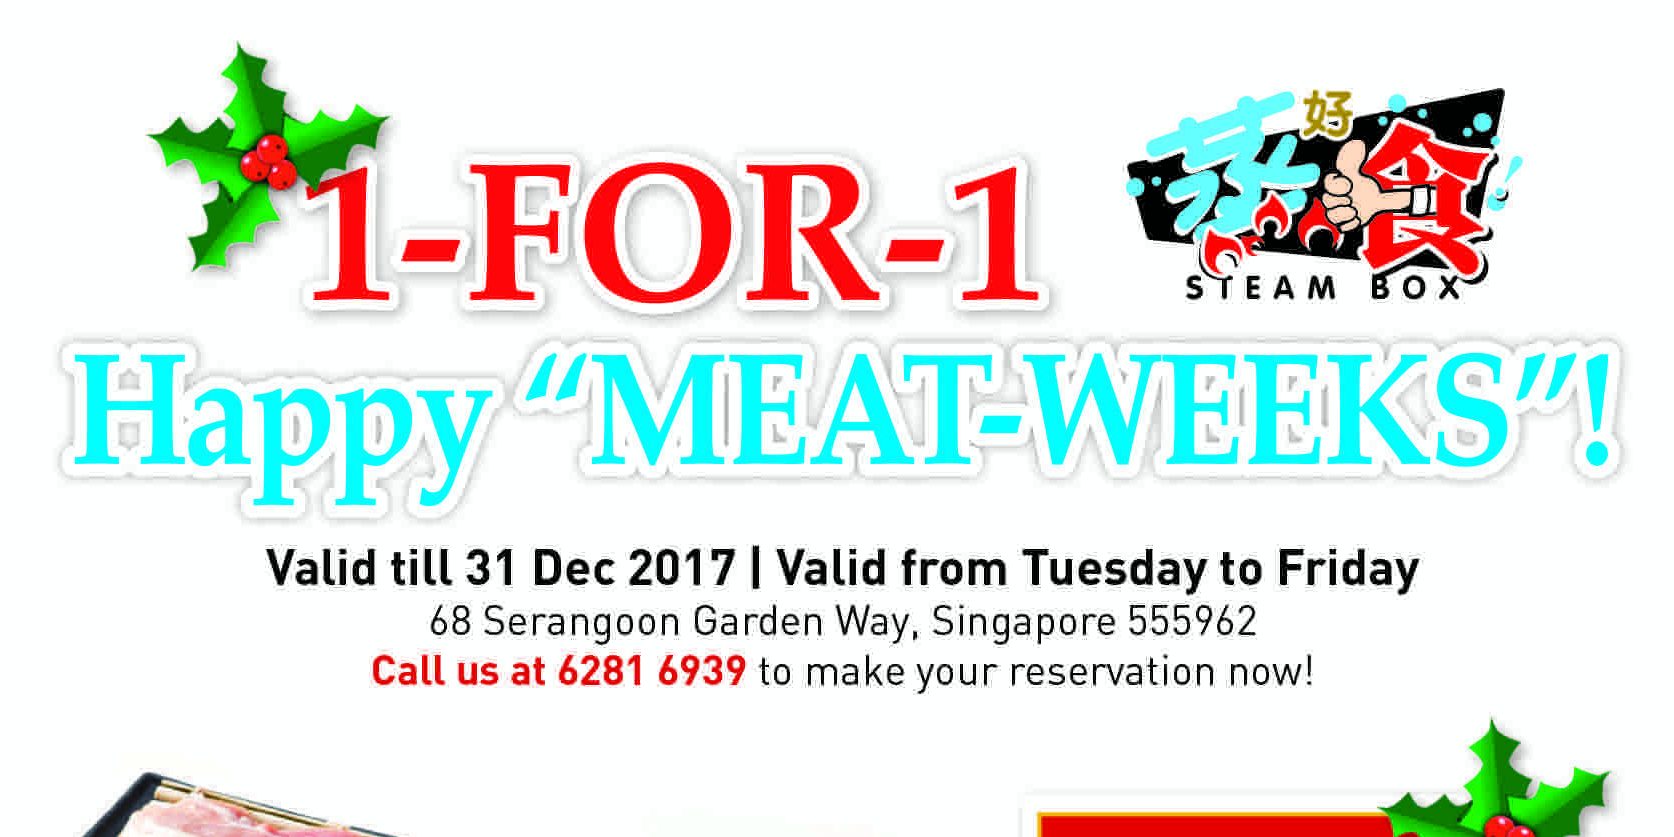 Steam Box Singapore “Happy Meat-Weeks” Extended 1-for-1 Promotion ends 31 Dec 2017